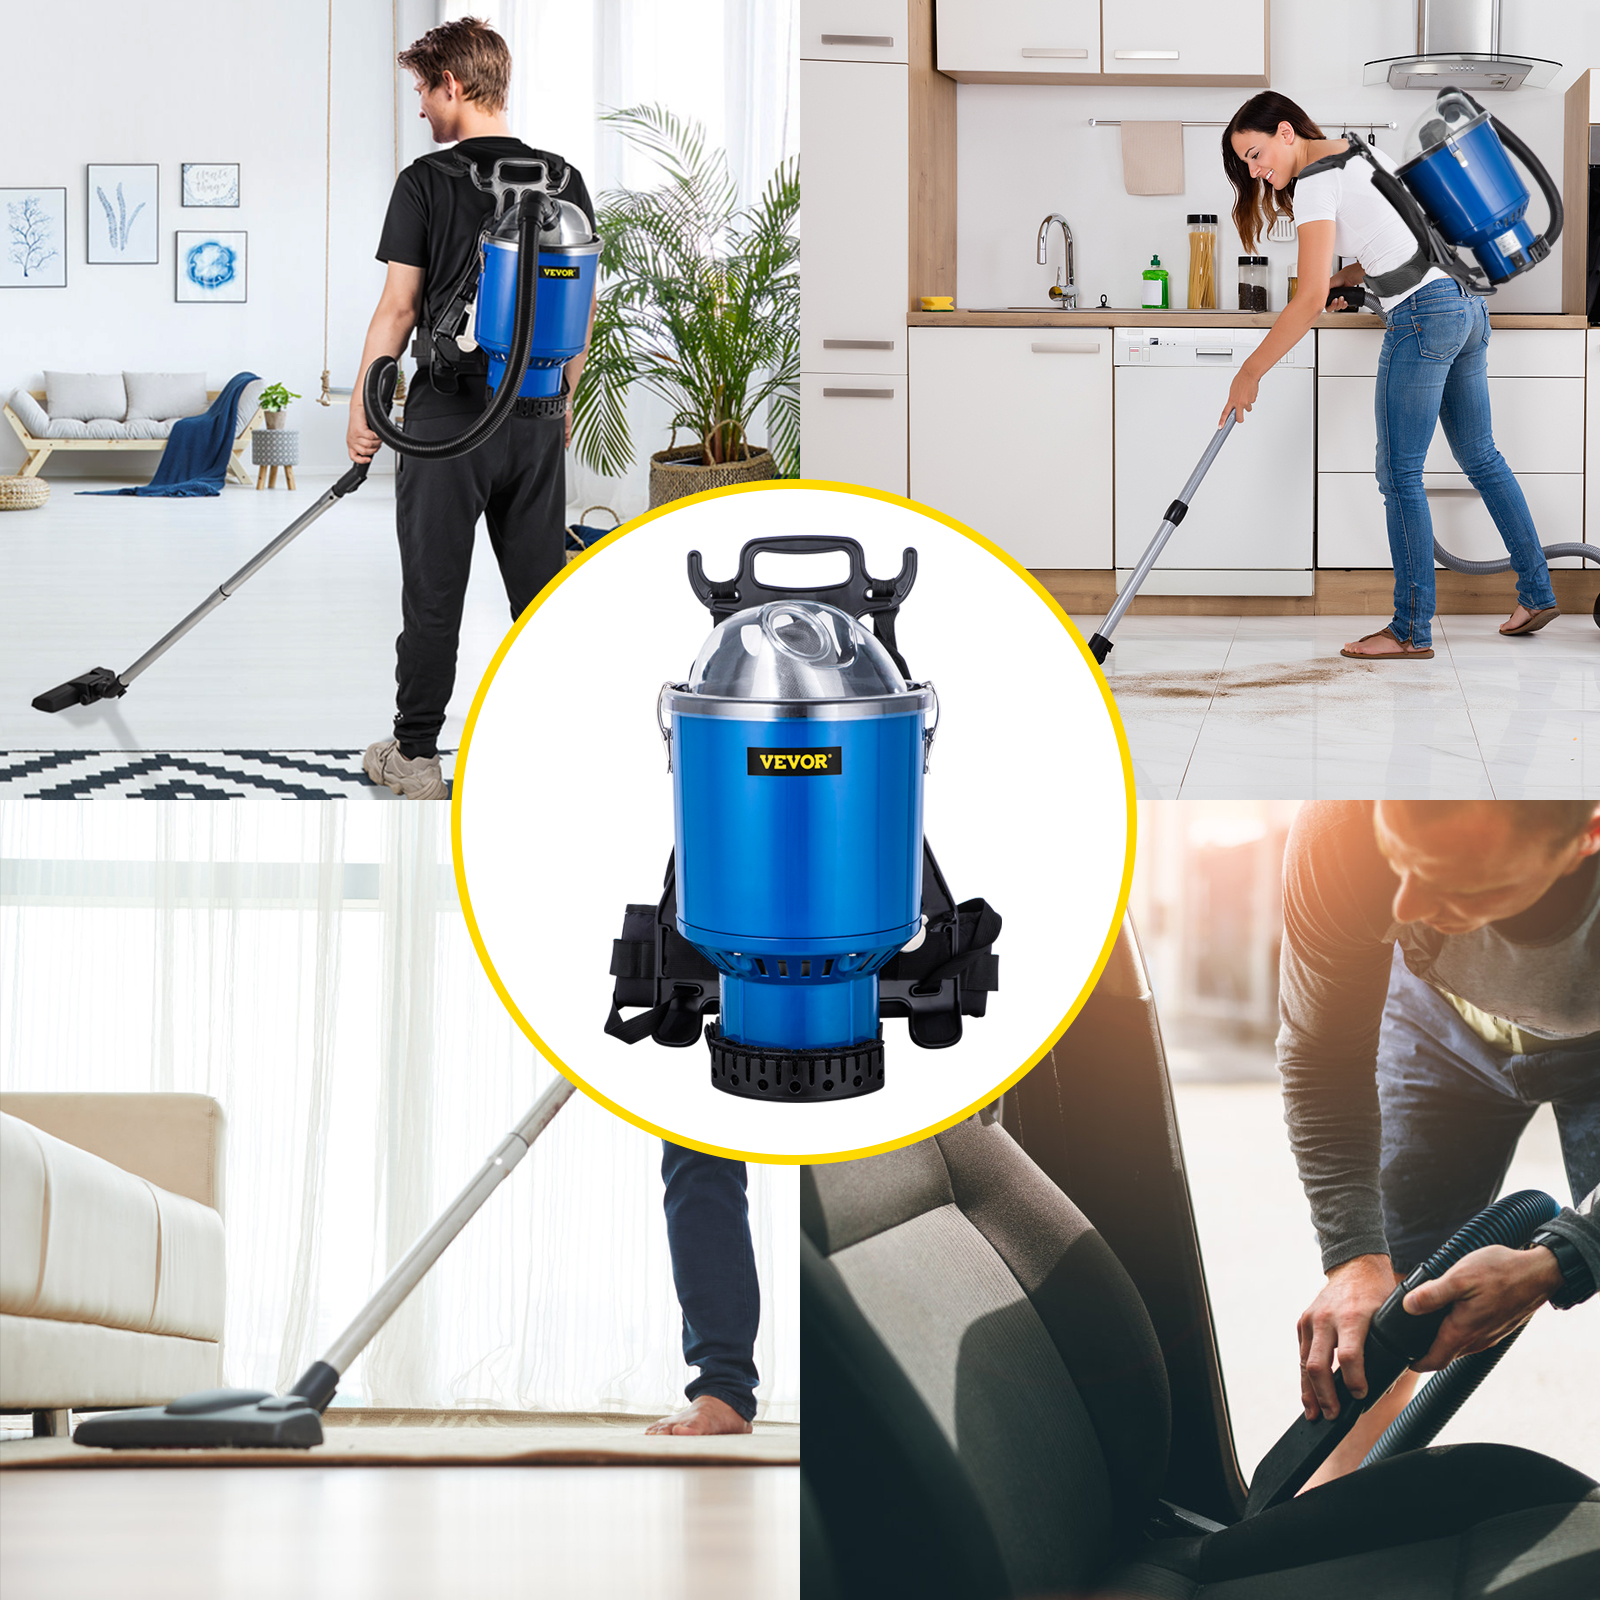 VEVOR Wet Dry Vac, 4 Gallon, 5 Peak HP, 3 in 1 Shop Vacuum with Blowing  Function Portable Attachments to Clean Floor, Upholstery, Gap, Car, ETL  Listed, Black